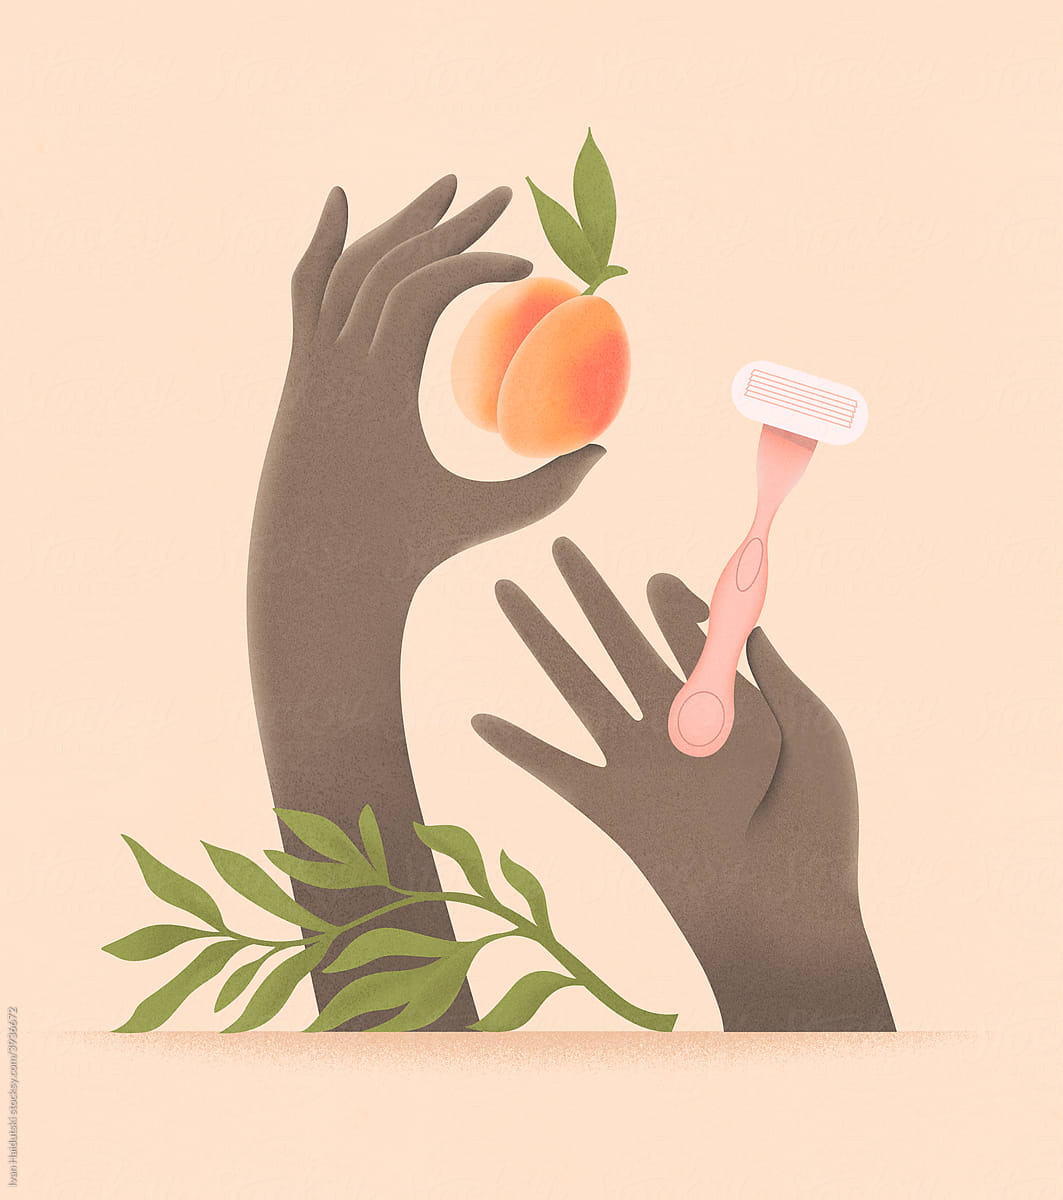 Hands with a razor shaving a peach illustration.